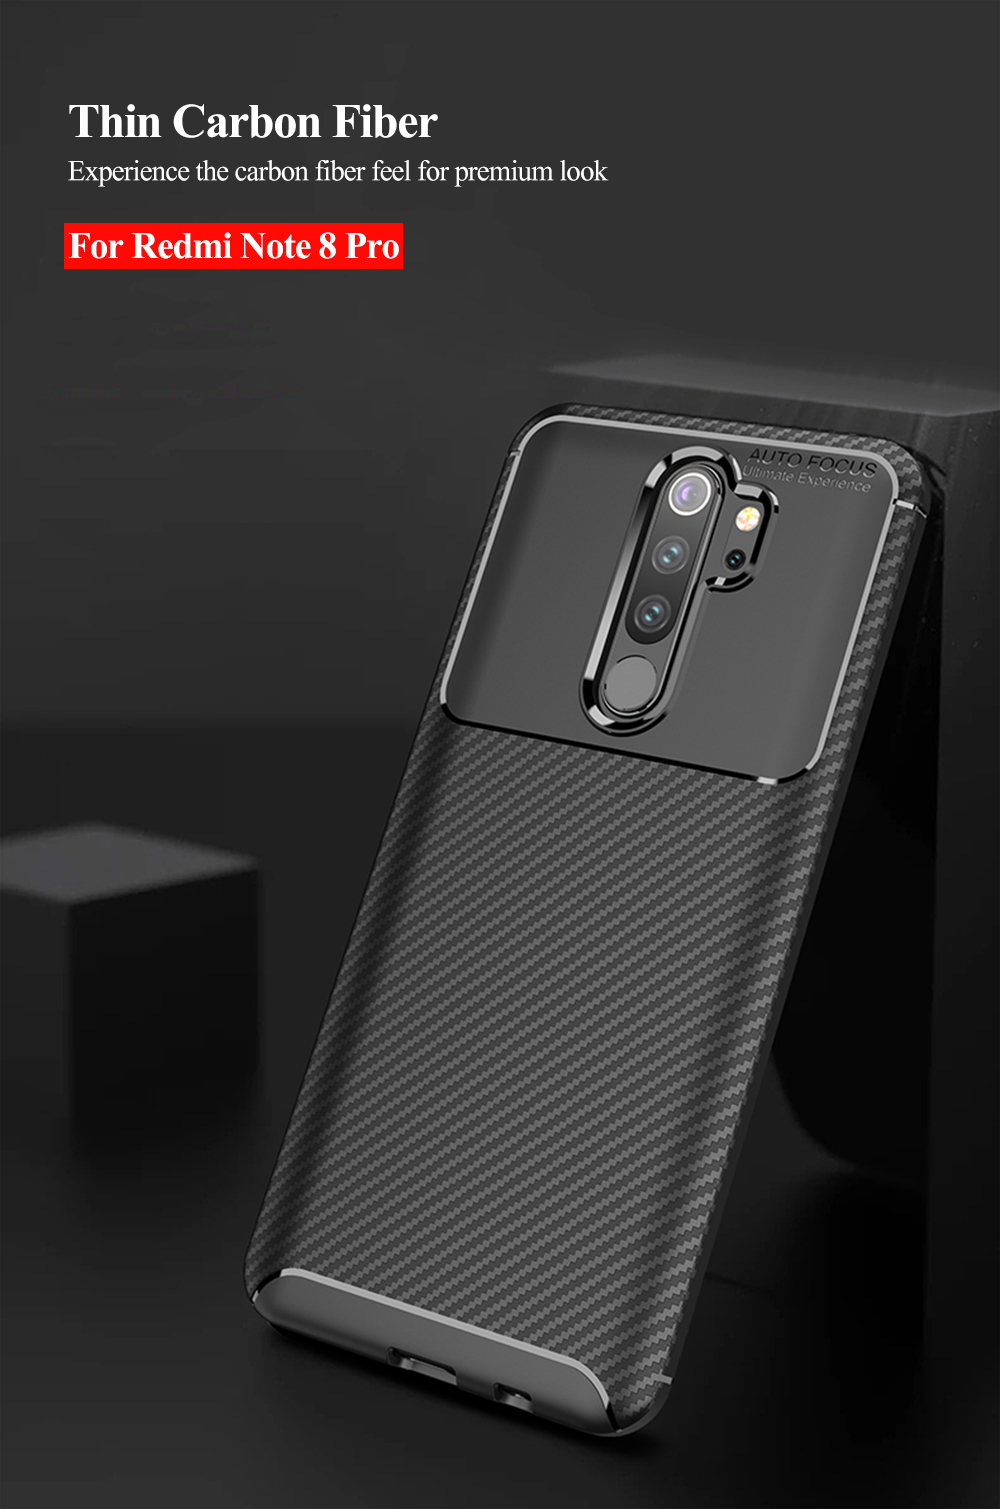 For-Xiaomi-Redmi-Note-8-Pro-Case-Bakeey-Luxury-Carbon-Fiber-Shockproof-Silicone-Protective-Case-Non--1602784-1